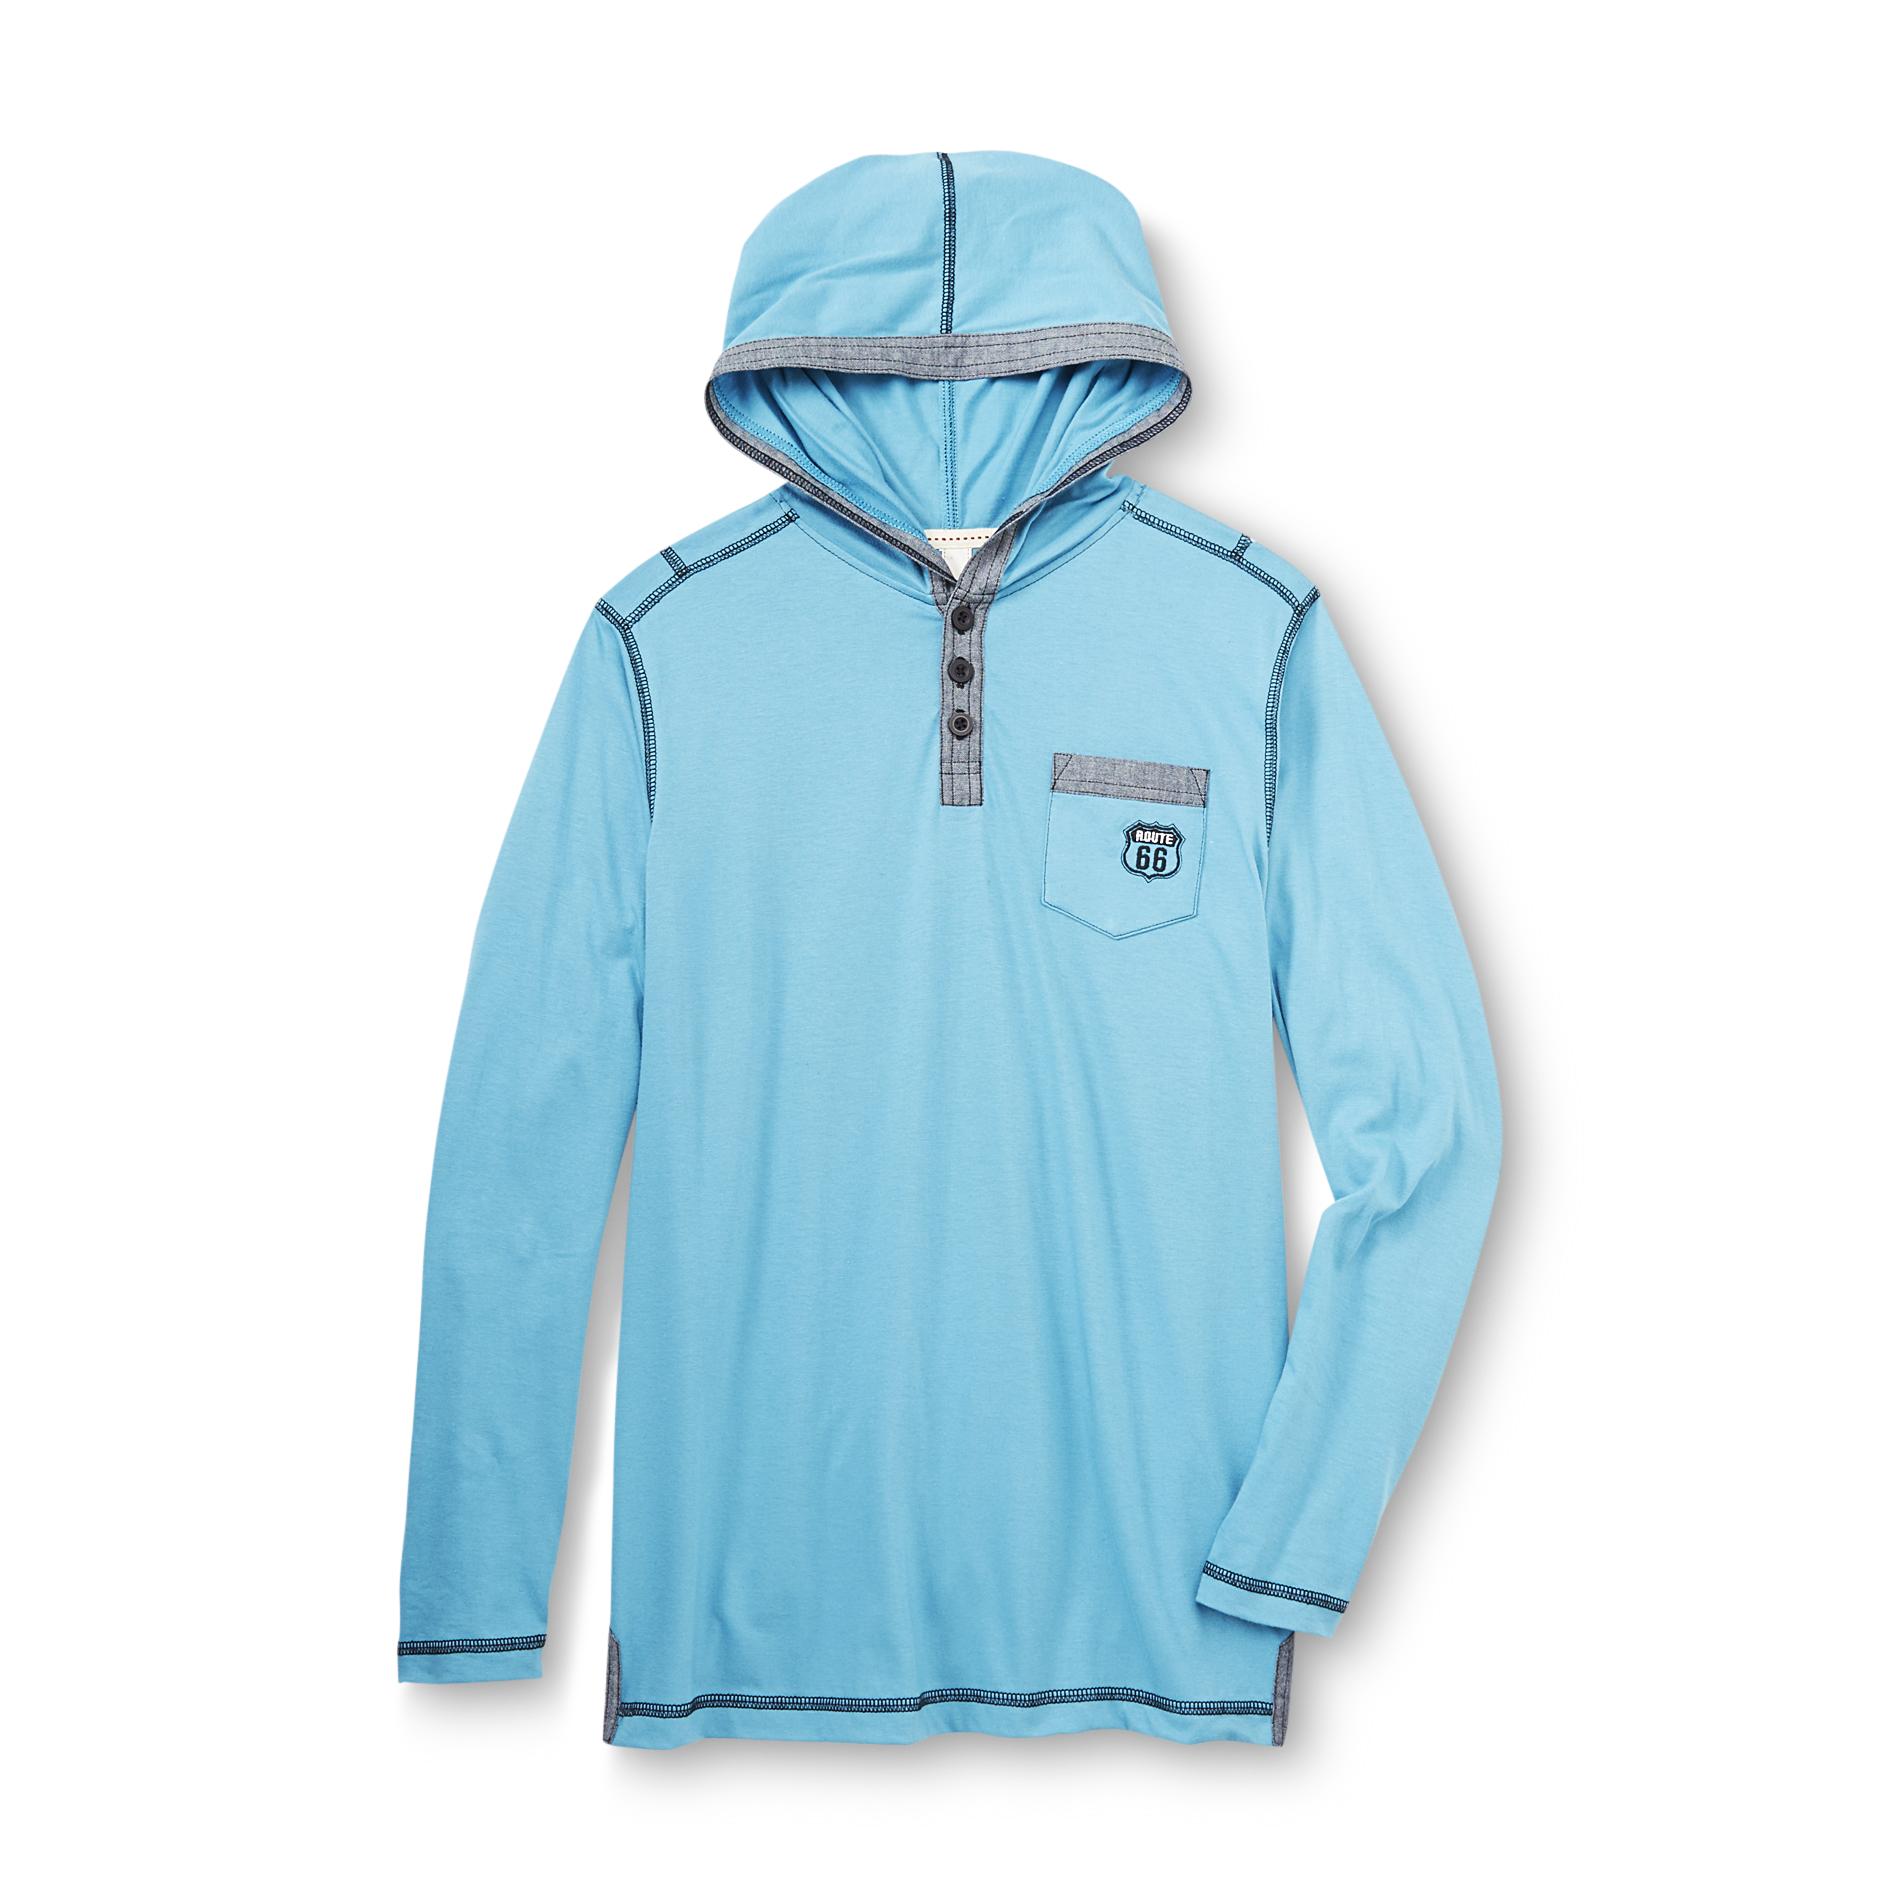 Route 66 Boy's Lightweight Hoodie - Chambray Trim